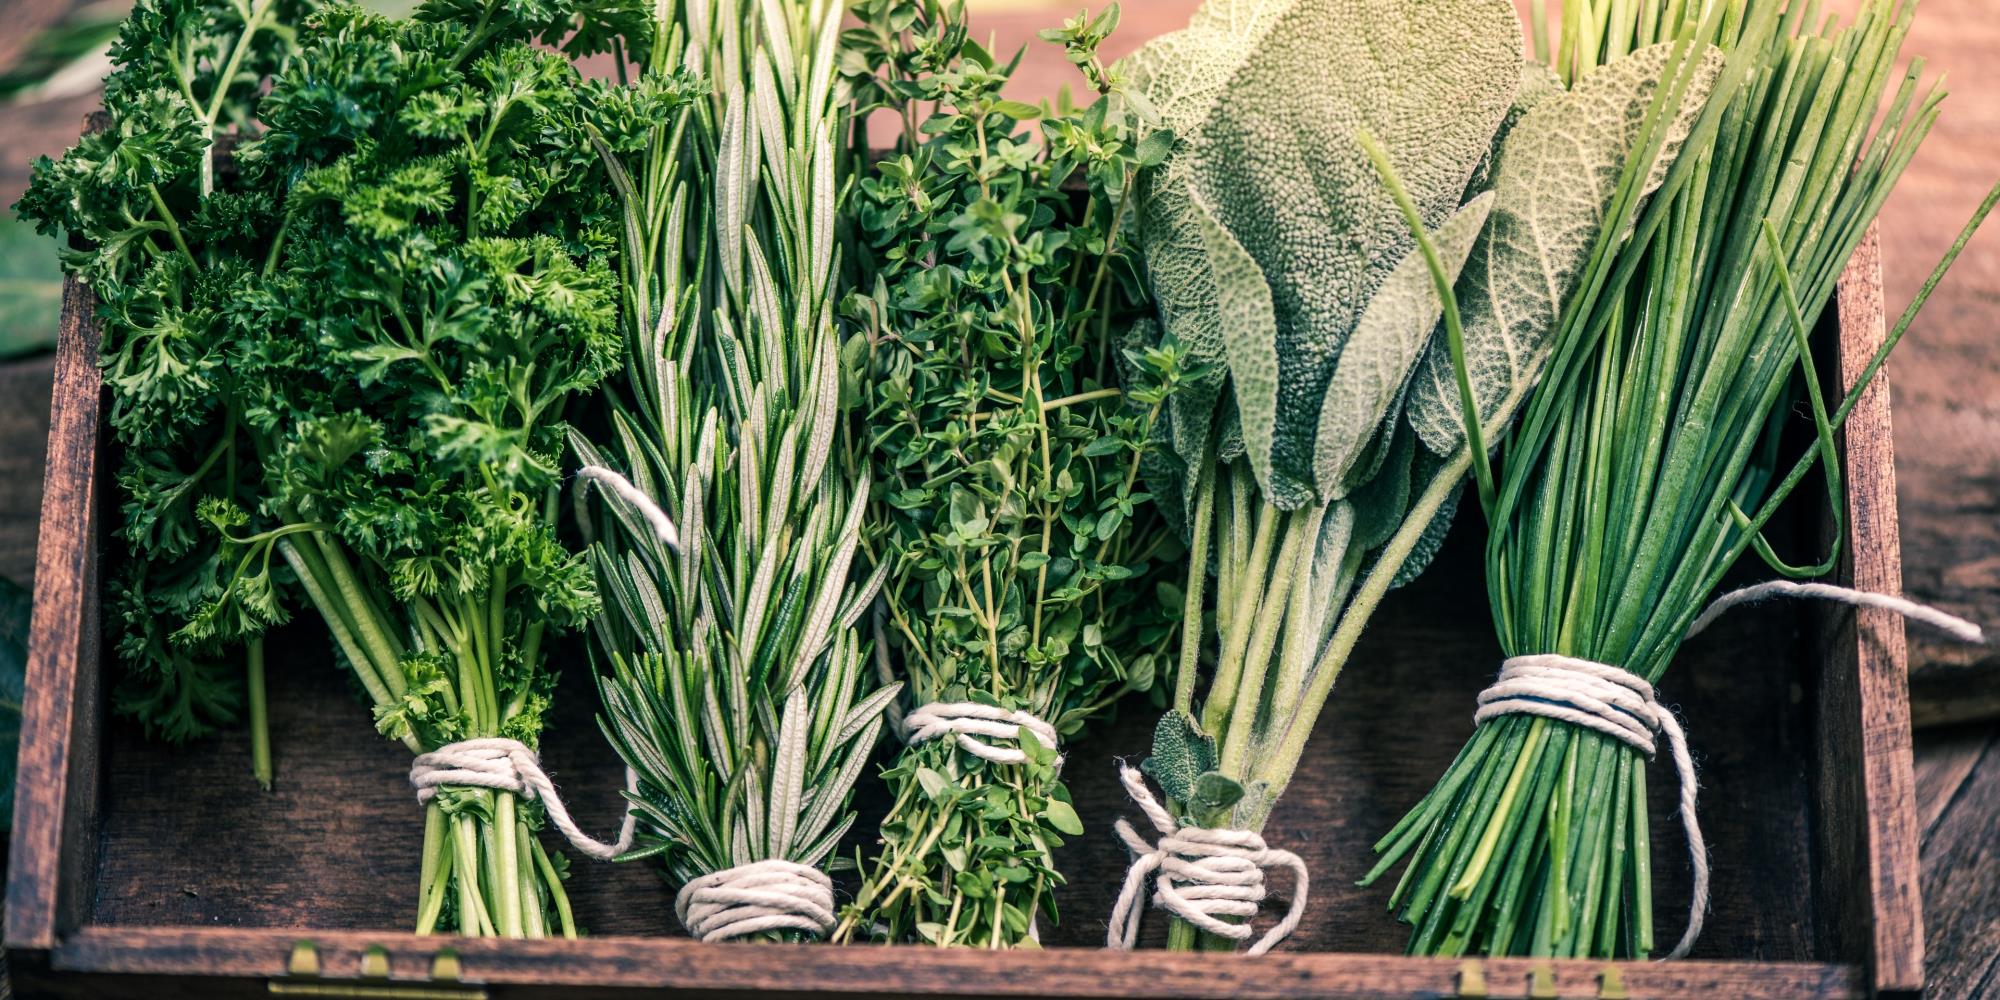 Our Top 5 Spring Kitchen Herbs